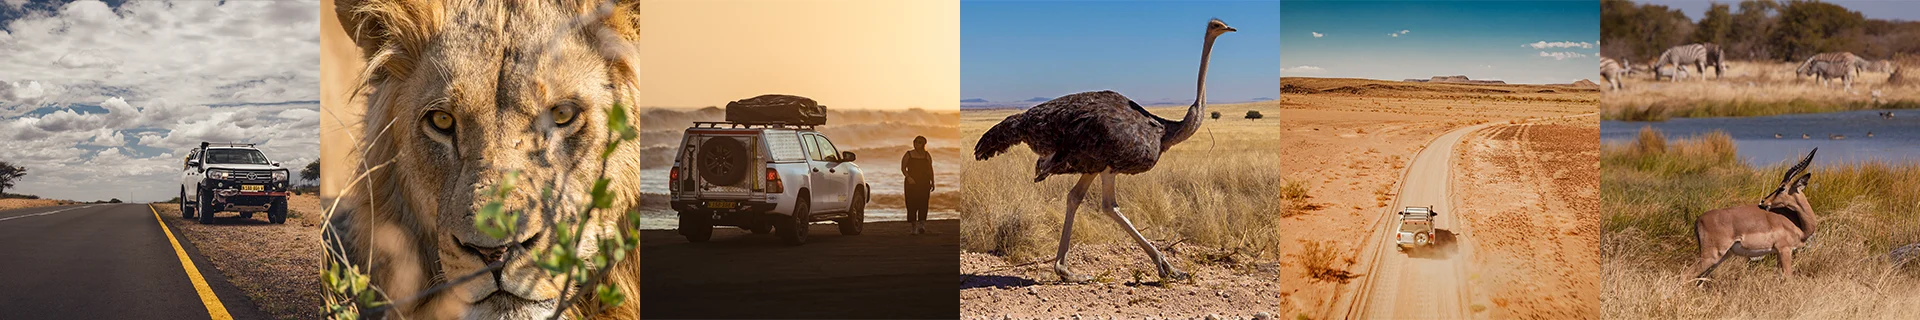 Namibia-Self-Drive-Safari-Tours-Route-All-In-One-footer